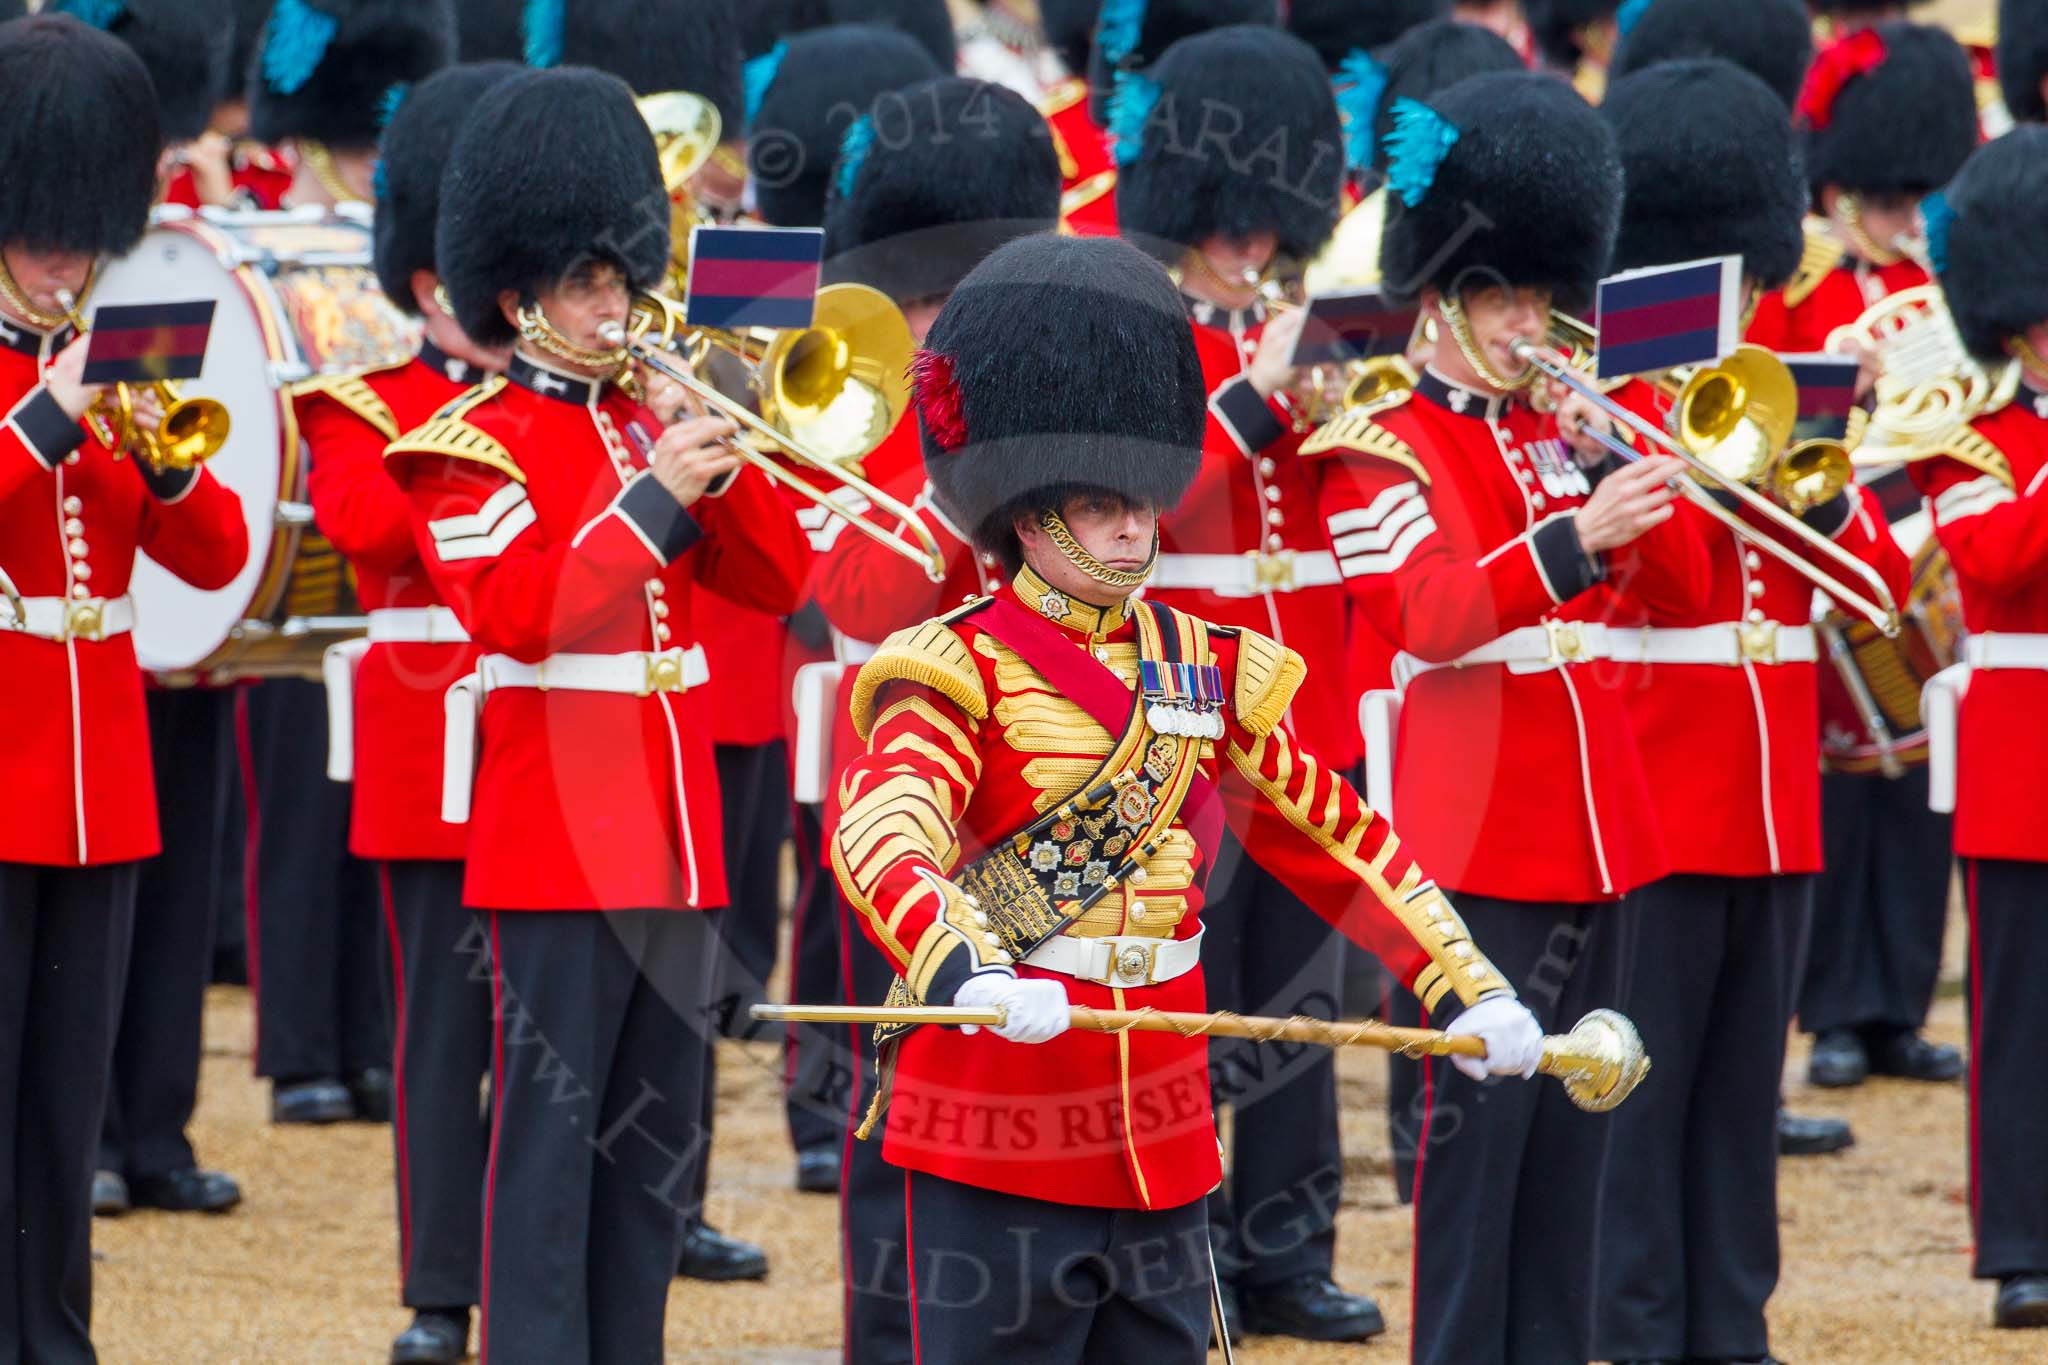 The Colonel's Review 2014.
Horse Guards Parade, Westminster,
London,

United Kingdom,
on 07 June 2014 at 11:49, image #574